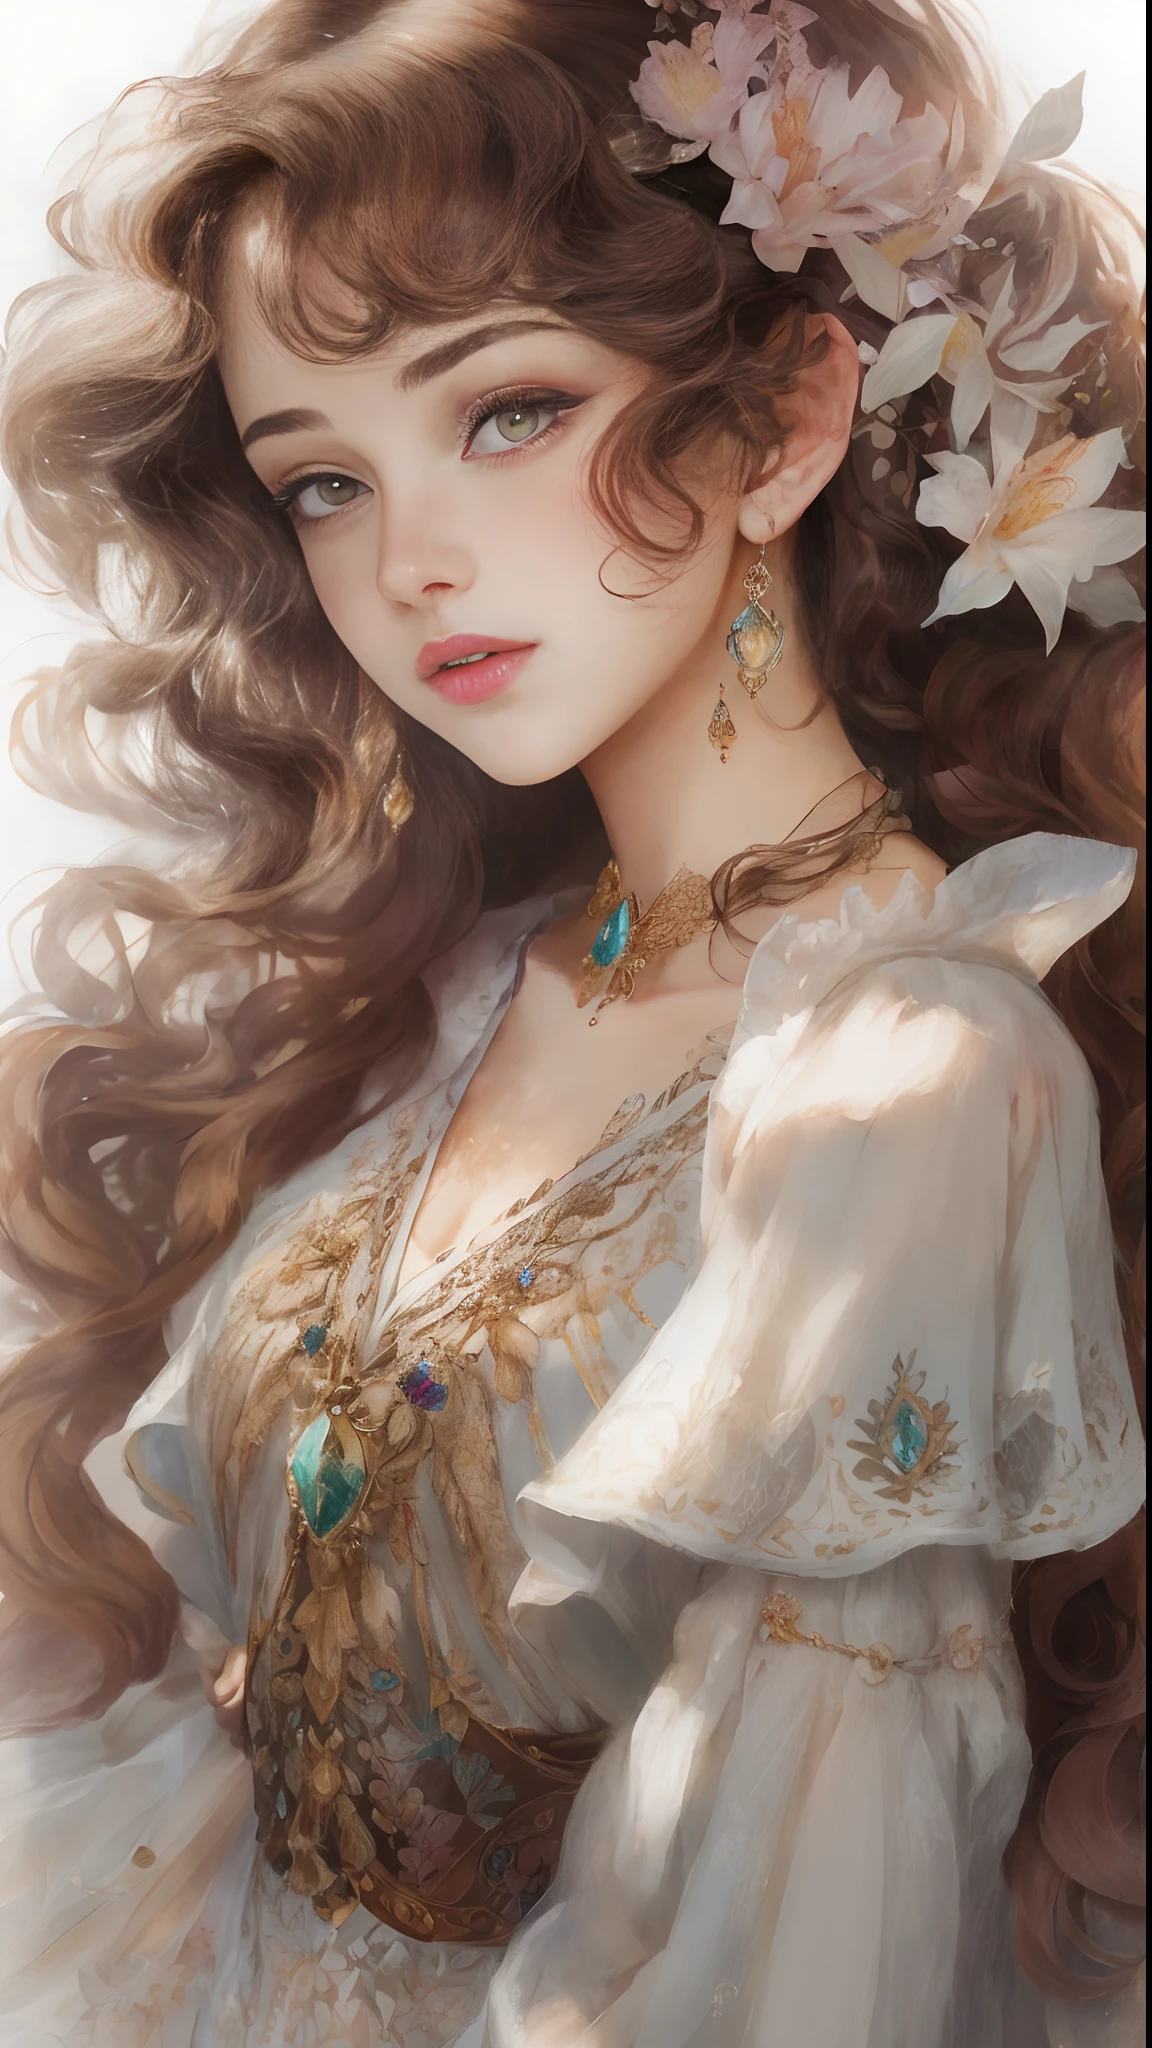 (Best quality, 4K, 8K, A high resolution, Masterpiece:1.2), Ultra-detailed, Realistic portrait of an 18 year old aristocratic girl, Exquisite facial features，Long brown curly hair details expressed, The posture is leisurely and natural，Graceful posture, Dreamy atmosphere, expressive brush strokes, mystical ambiance, Artistic interpretation,Delicately coiled hair，Floral jewelry with exquisite details, Crystal diamond jewelry，Small fresh aesthetics，Stunning intricate costumes, Fantasy illustration, Subtle colors and tones, mystical aura,The details have been upgraded